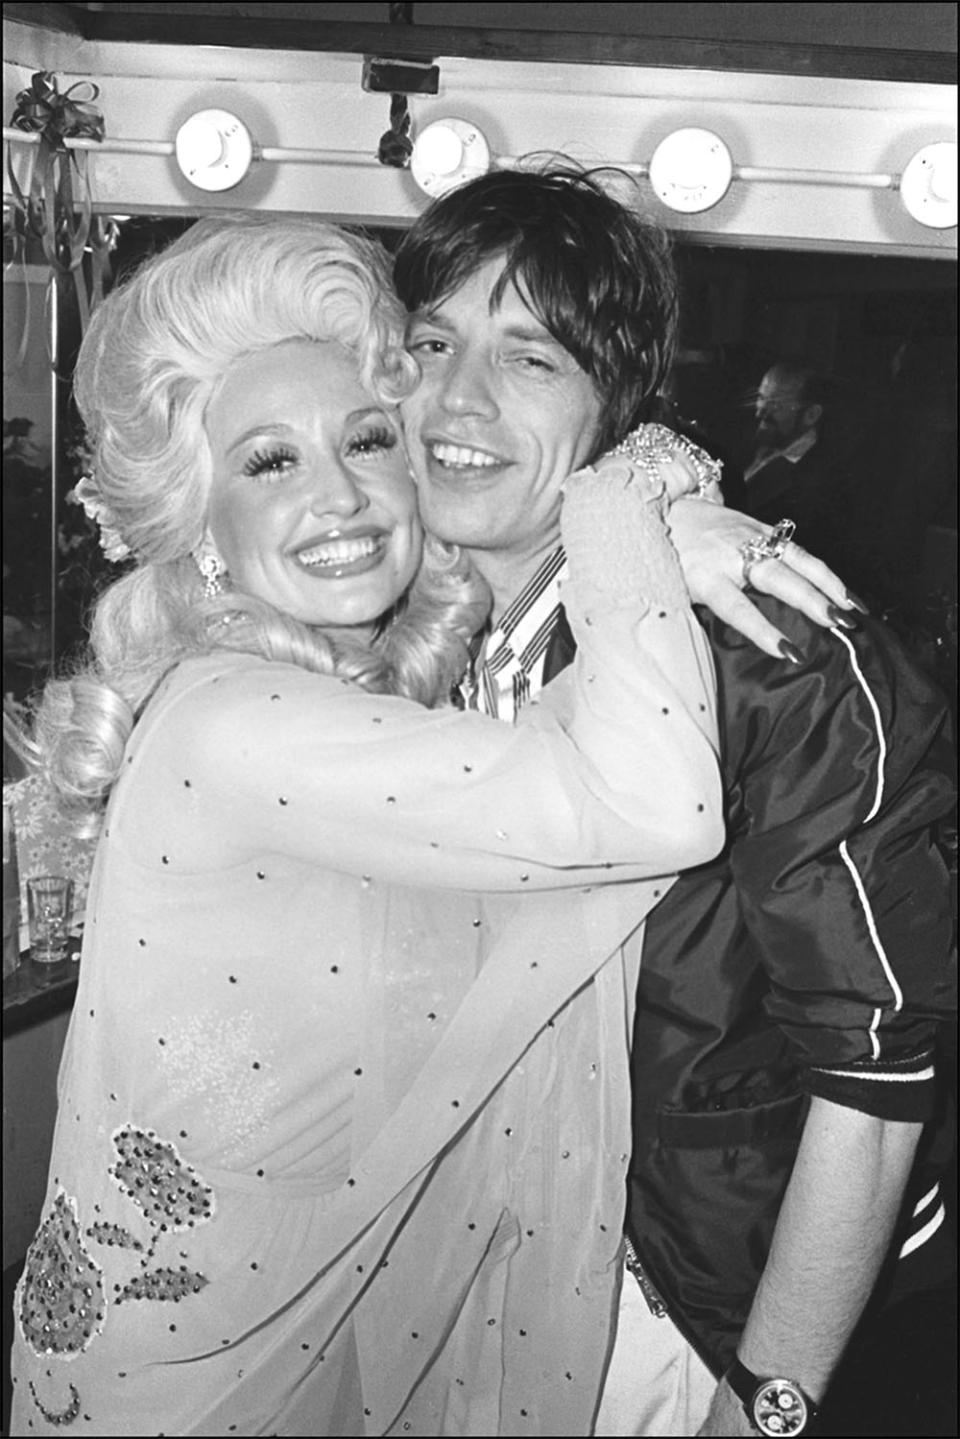 After her performance at the Bottom Line, American Country musician Dolly Parton hugs British rocker Mick Jagger backstage, New York, New York, May 14, 1977.